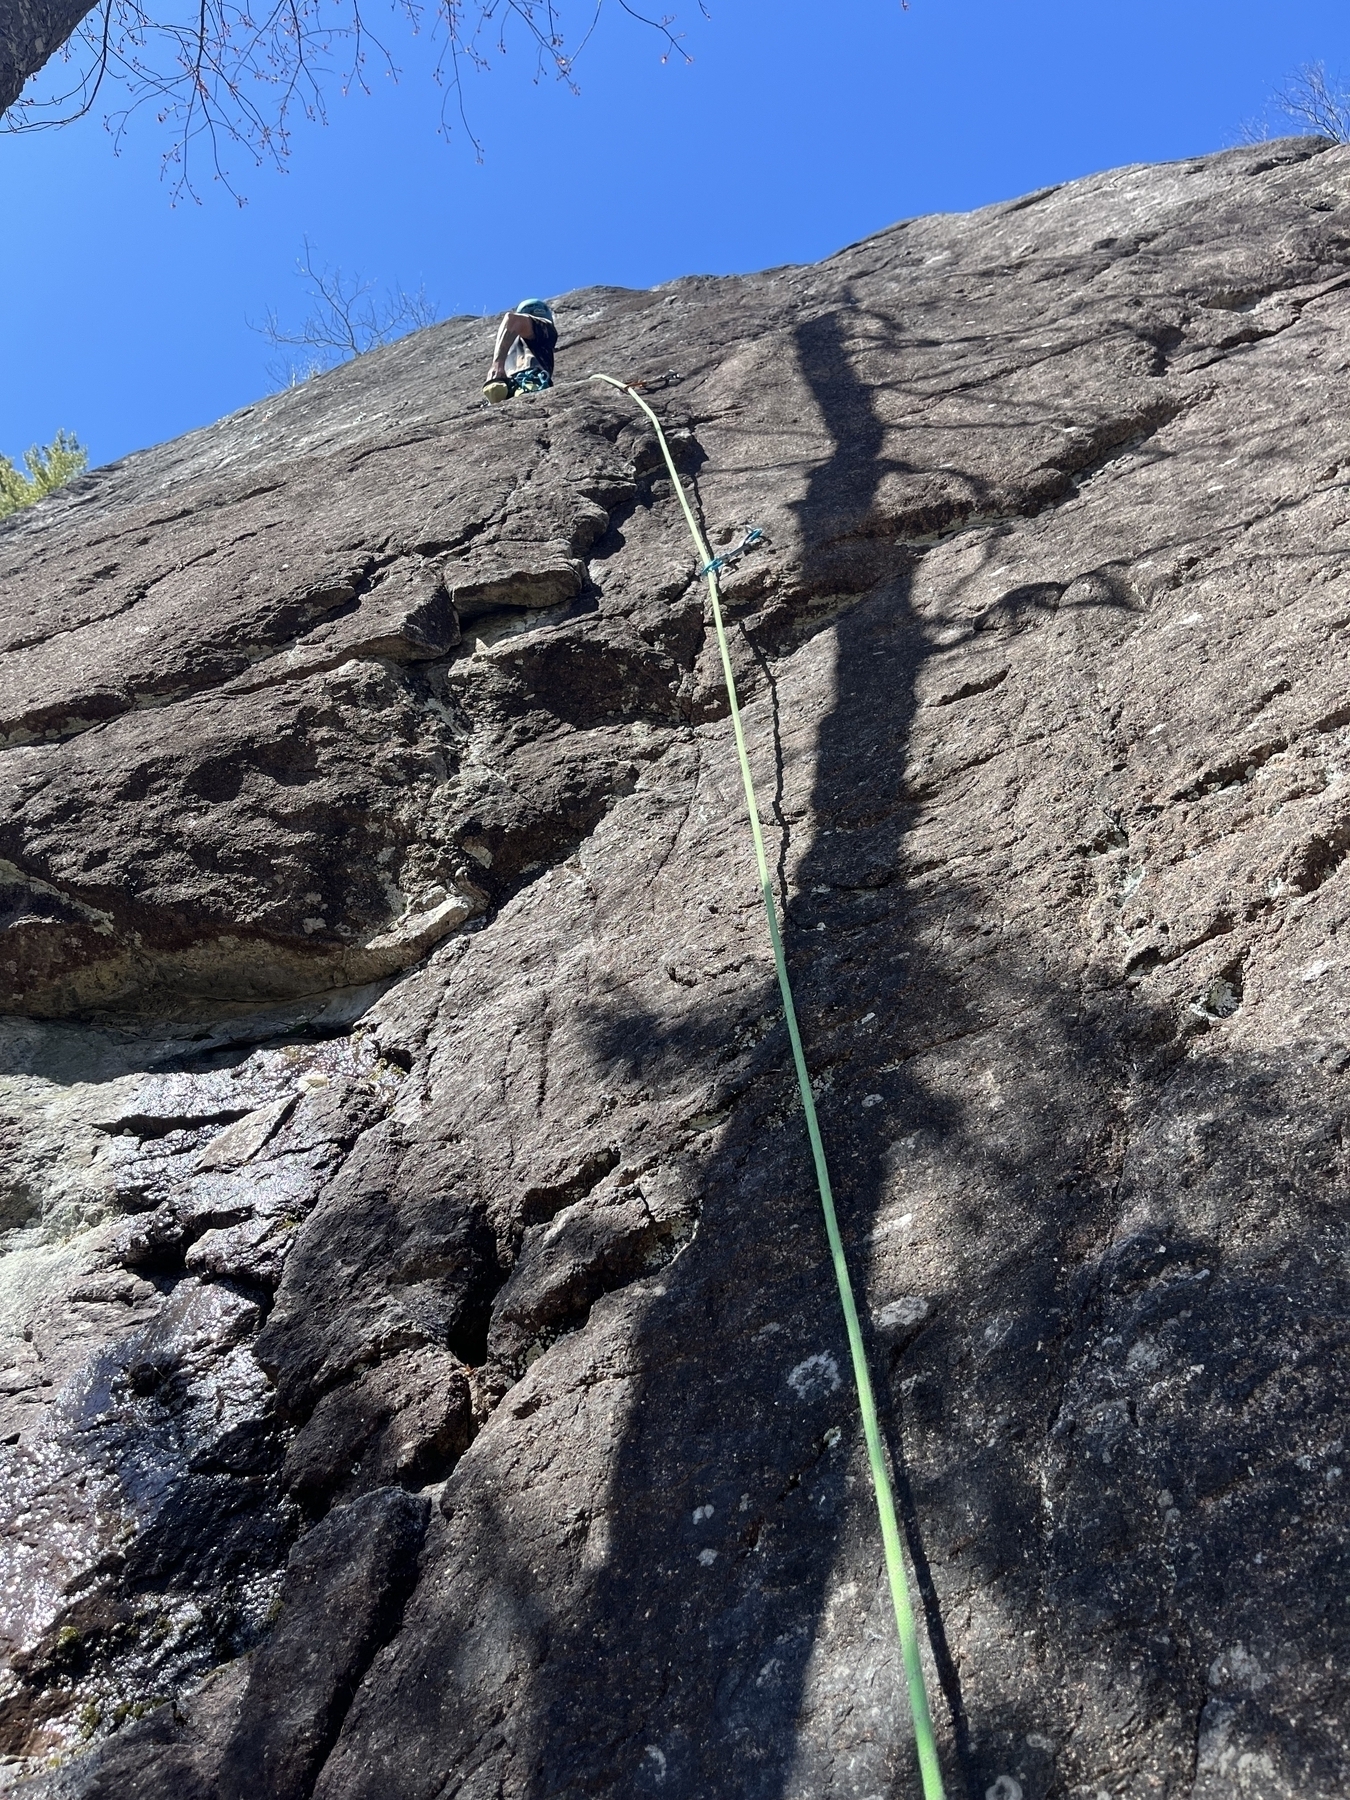 A climber ascends a steep rock face using a rope, with clear skies above and trees in the background.